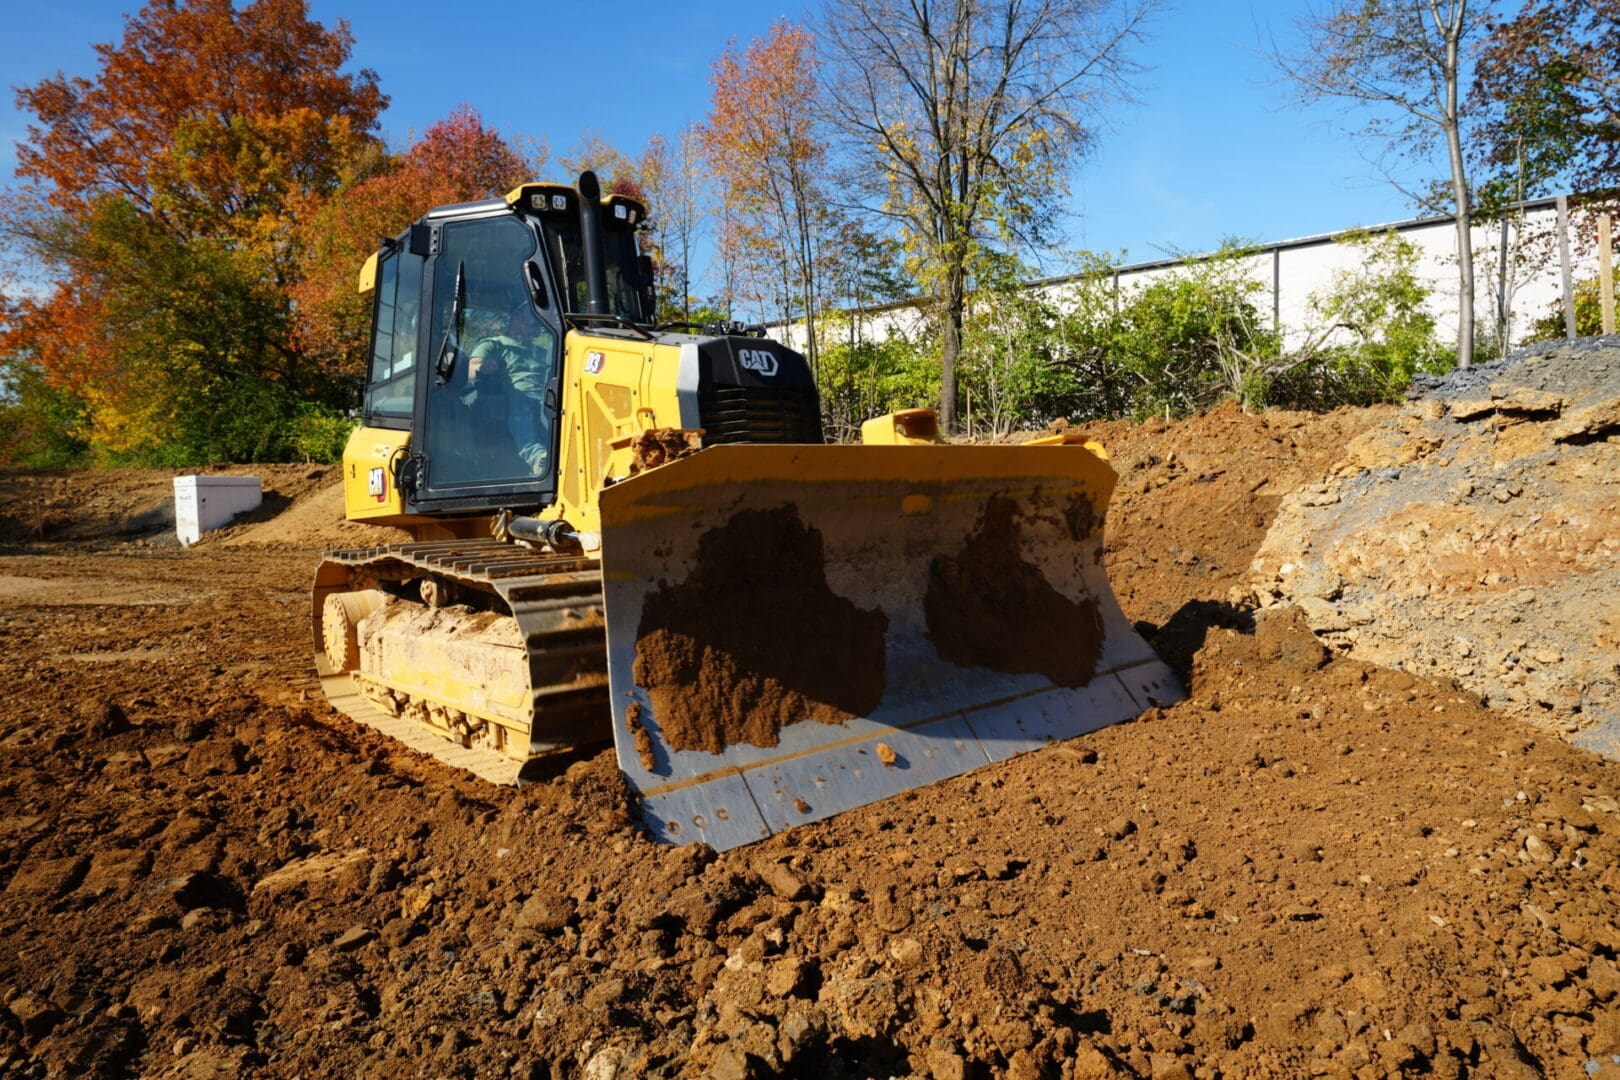 A yellow bulldozer performing site work in a dirt field.